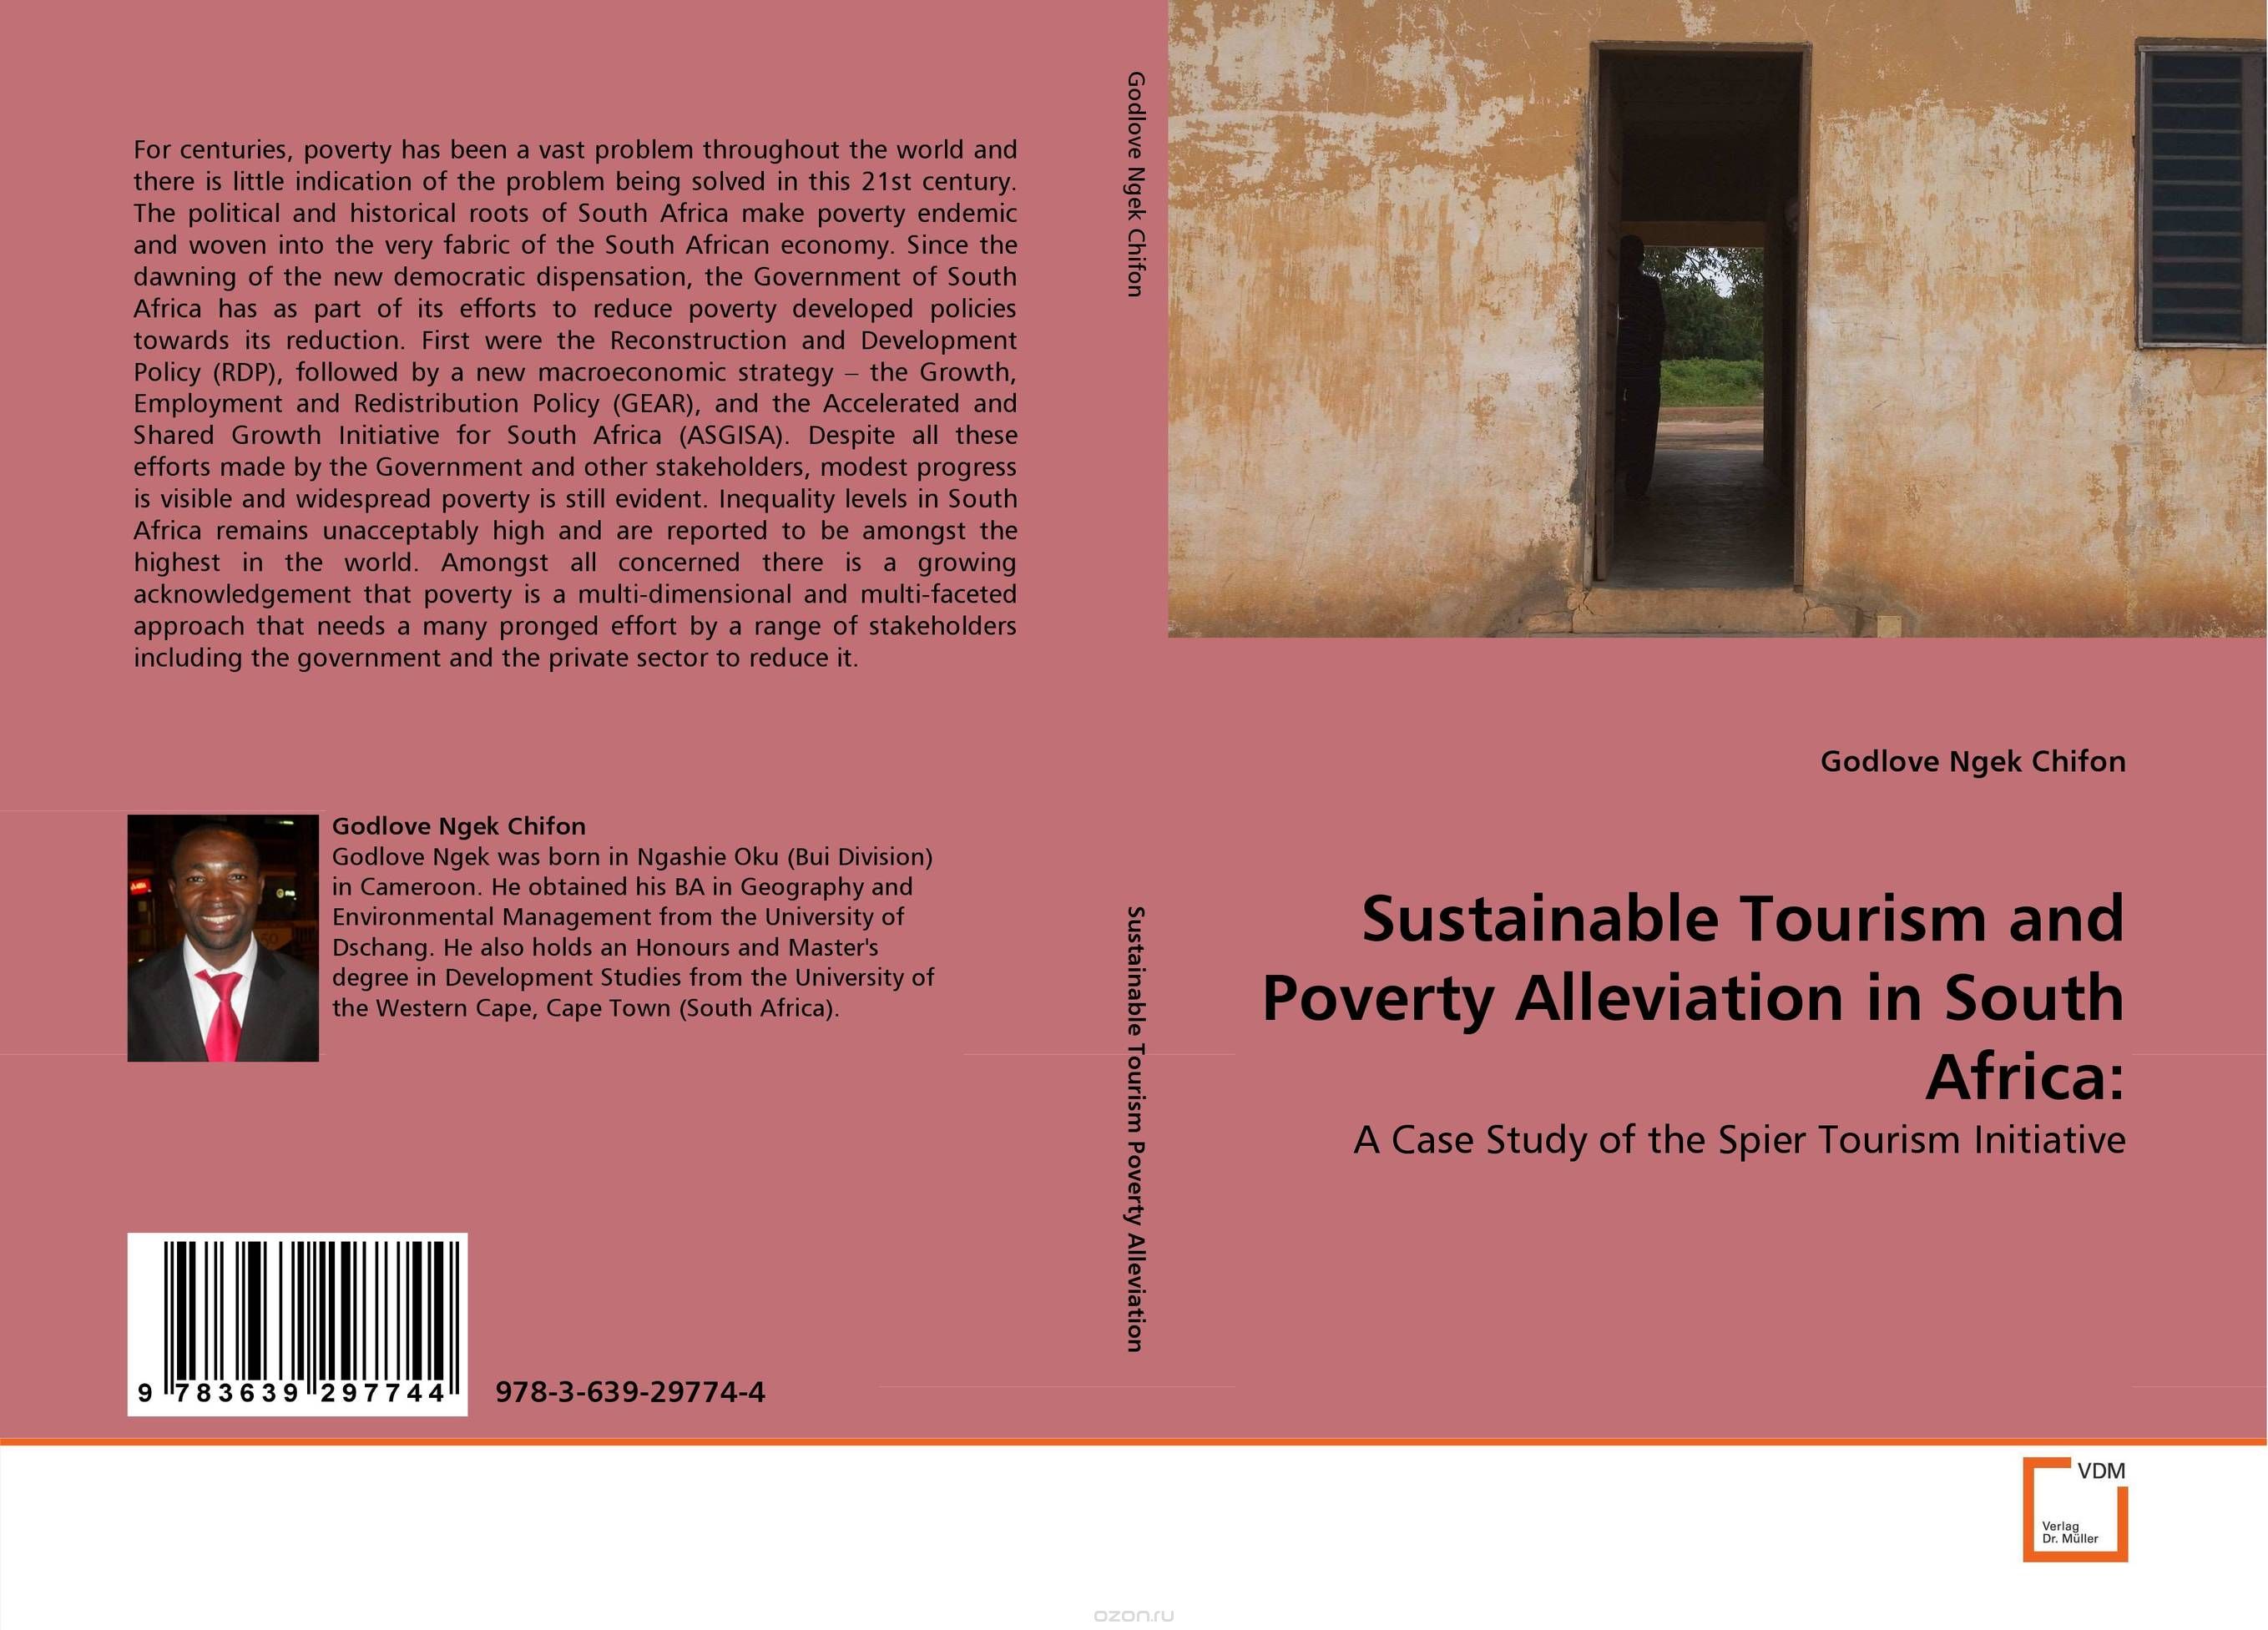 Скачать книгу "Sustainable Tourism and Poverty Alleviation in South Africa:"